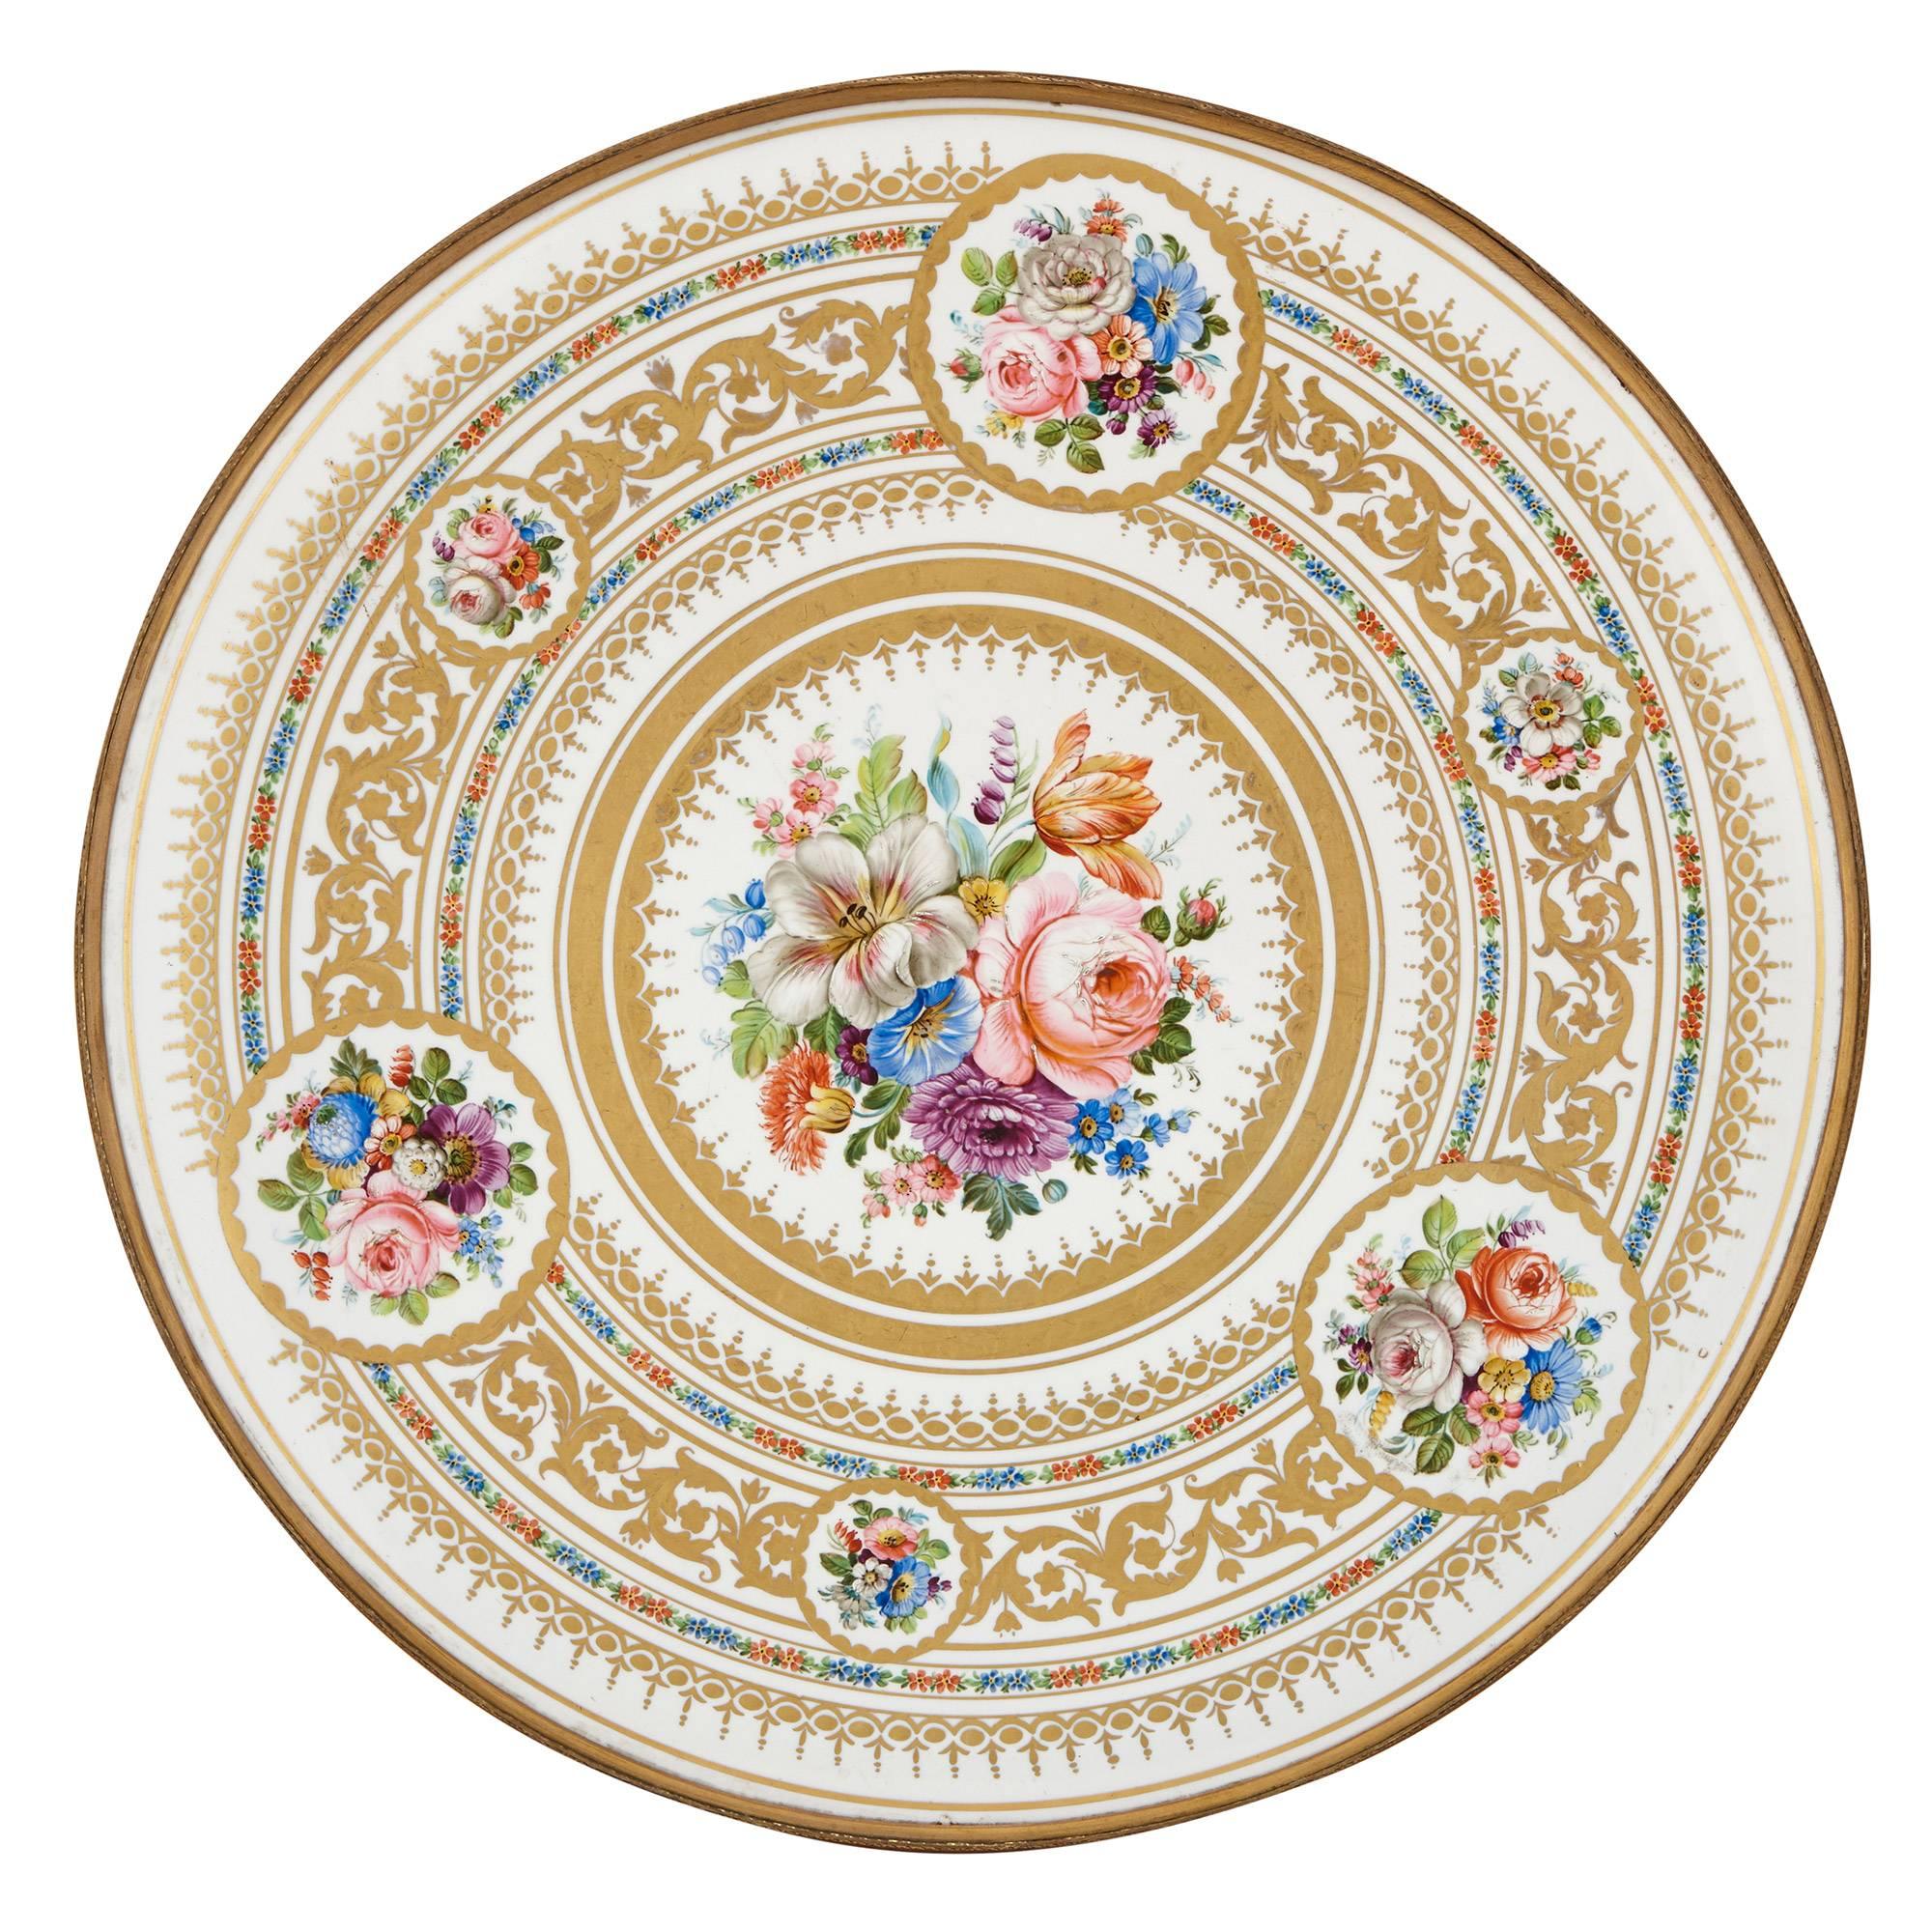 This delicately detailed circular gueridon table is crafted of ormolu, and features a very fine hand painted porcelain top. The porcelain top is decorated with flowers in circular patterns, set on a white ground with parcel gilt detailing. The edge